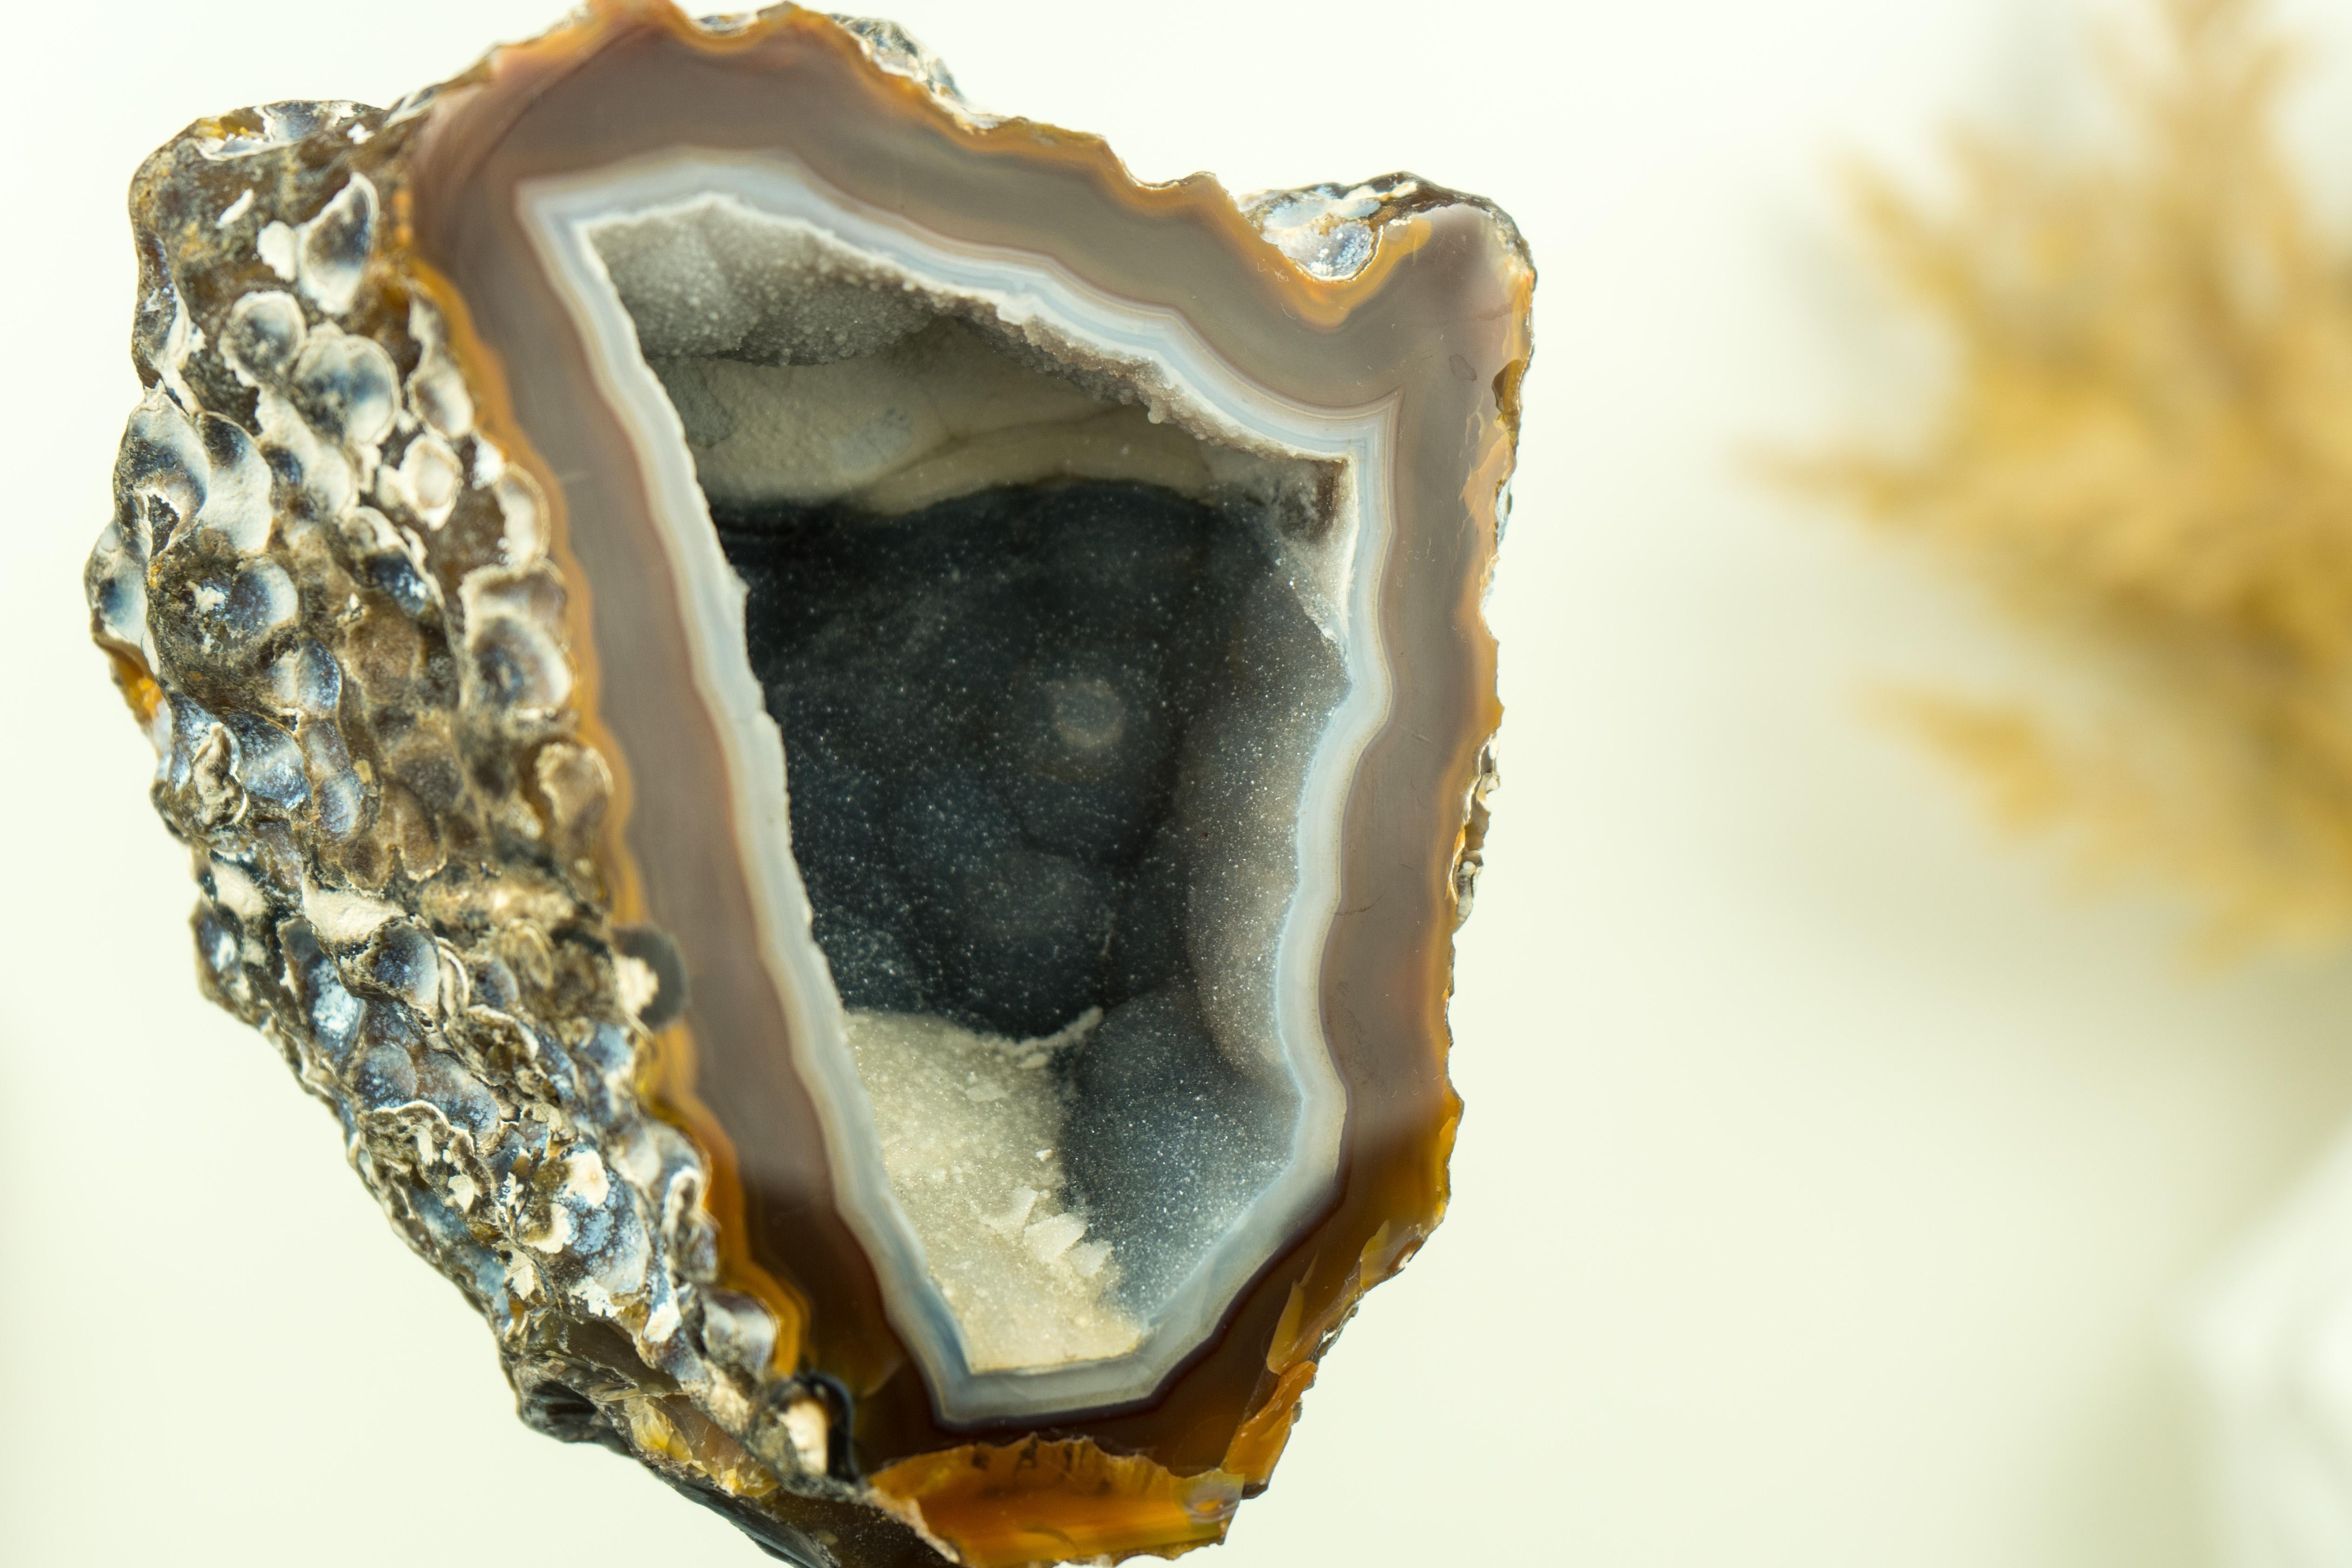 Amethyst Gallery Grade Amber and White Lace Agate Geode with Blue Galaxy Druzy For Sale